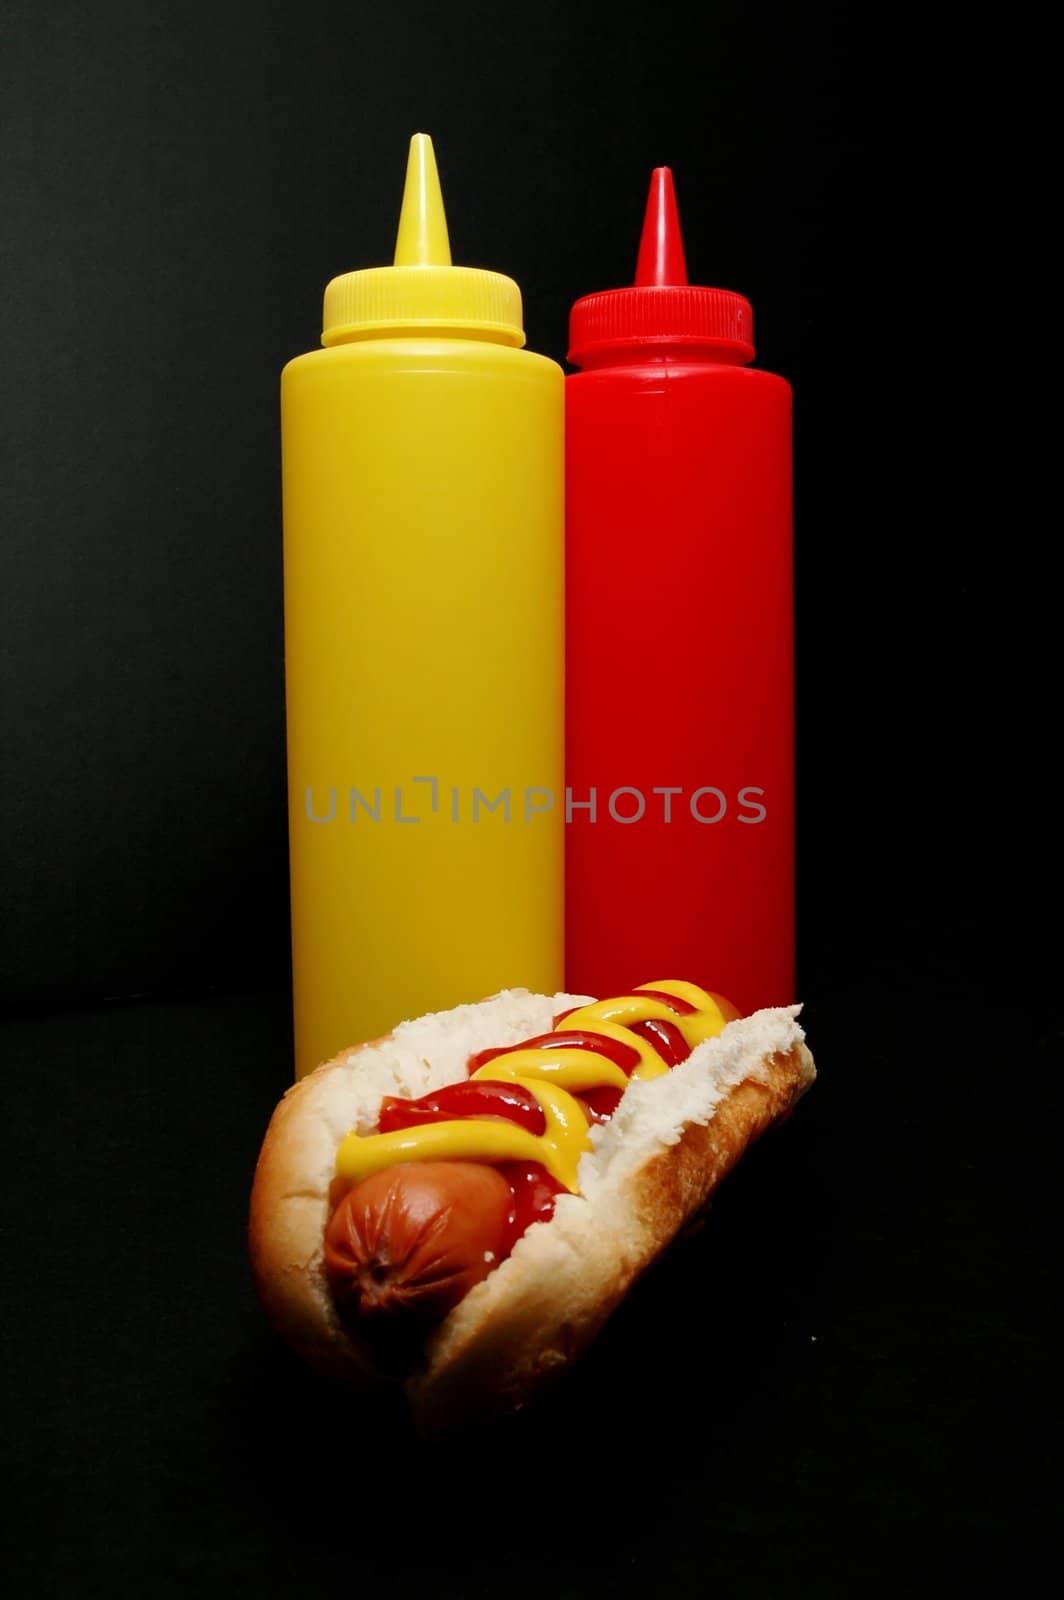 Hot dog with ketchup and mustard bottles.  Isolated on black background.